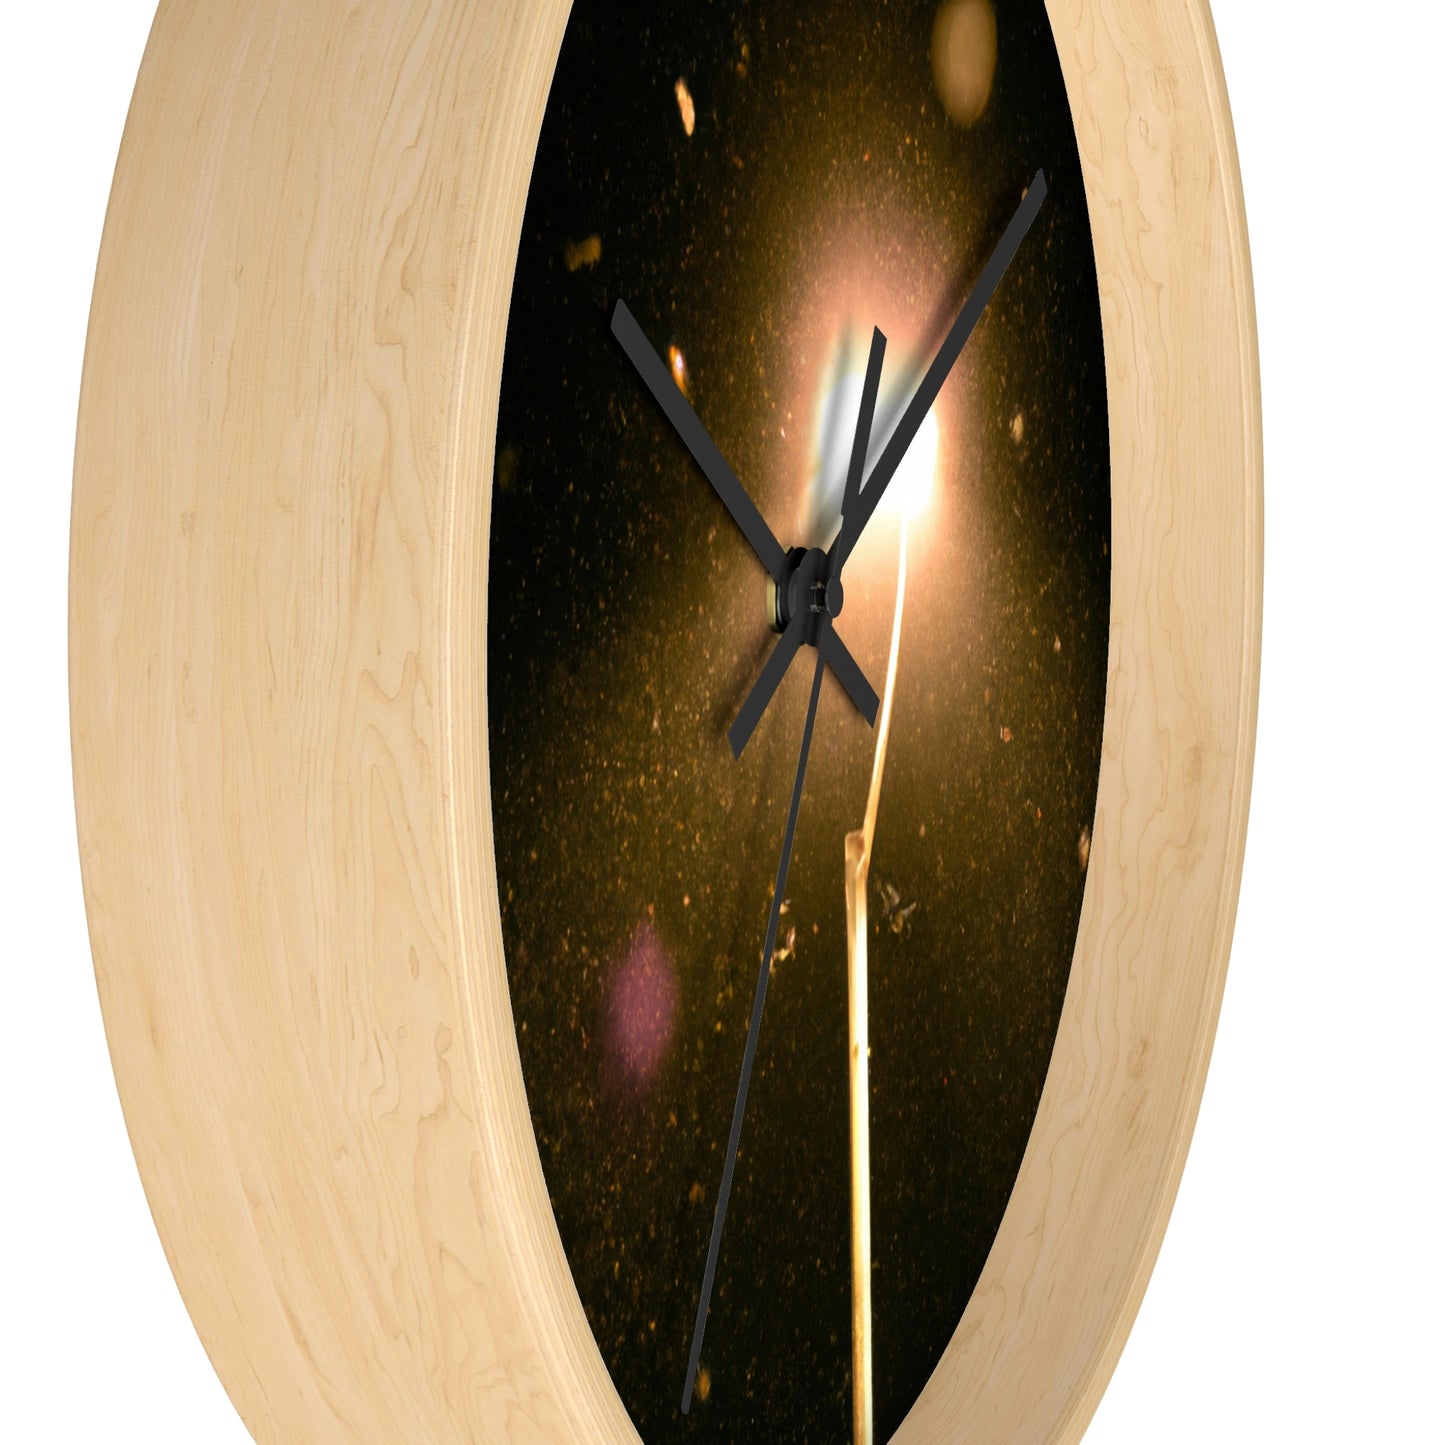 Winter's Lonely Lullaby - The Alien Wall Clock